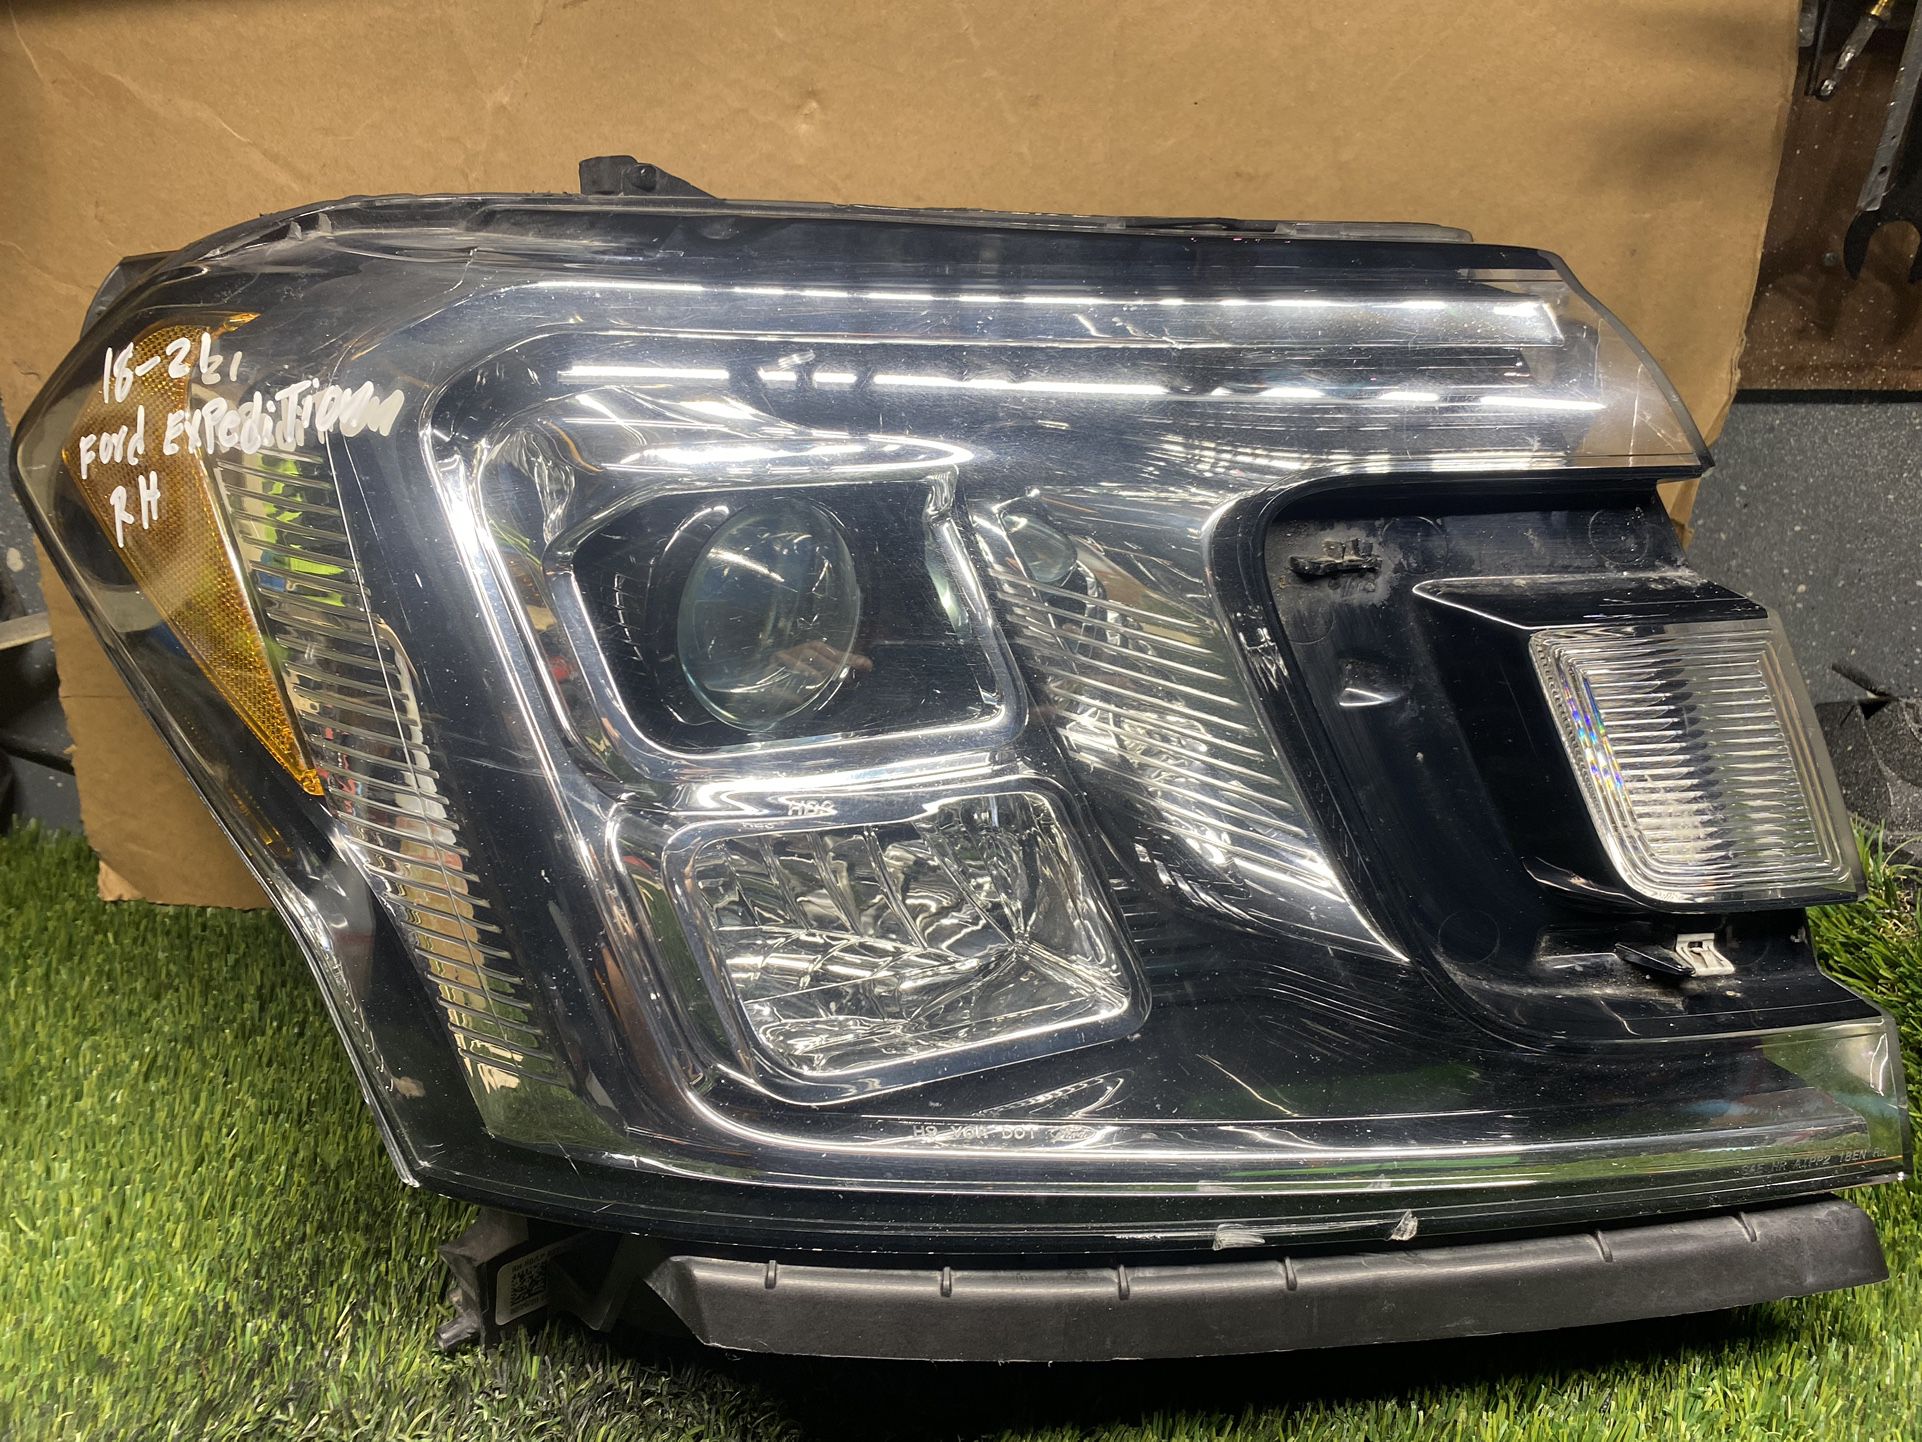 18-21 Ford Expedition Headlight Right Passenger Side OEM 